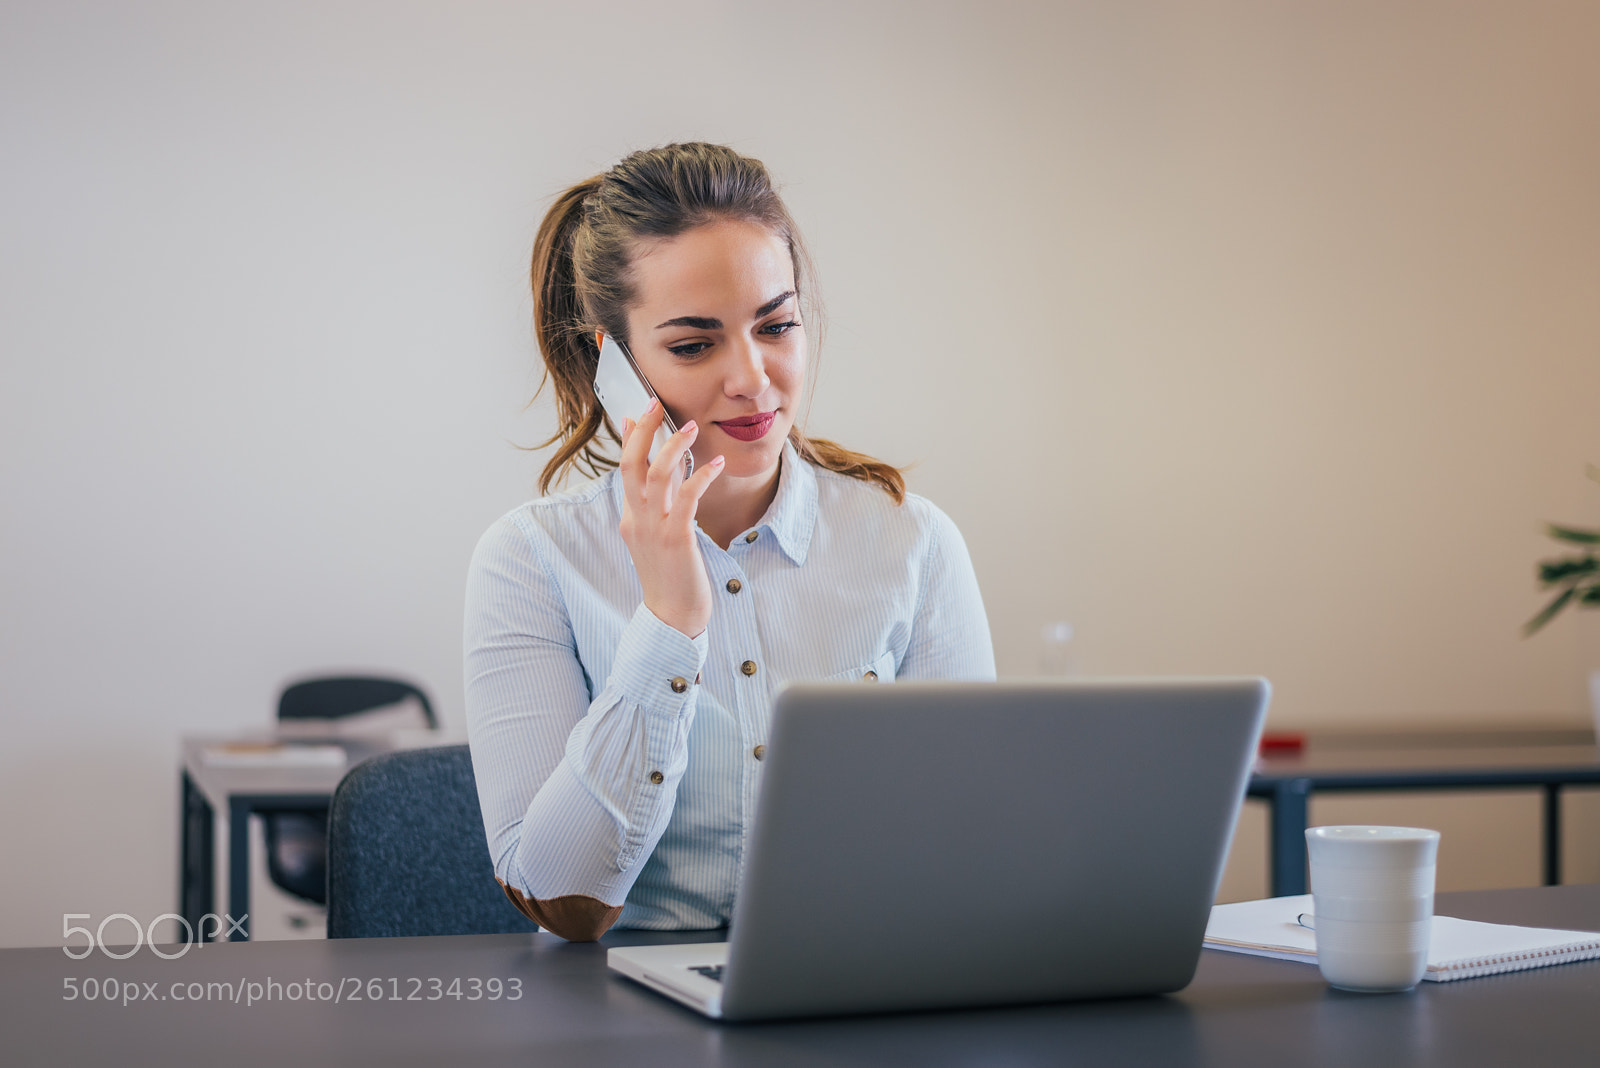 Nikon D610 sample photo. Smiling young businesswoman sitting photography